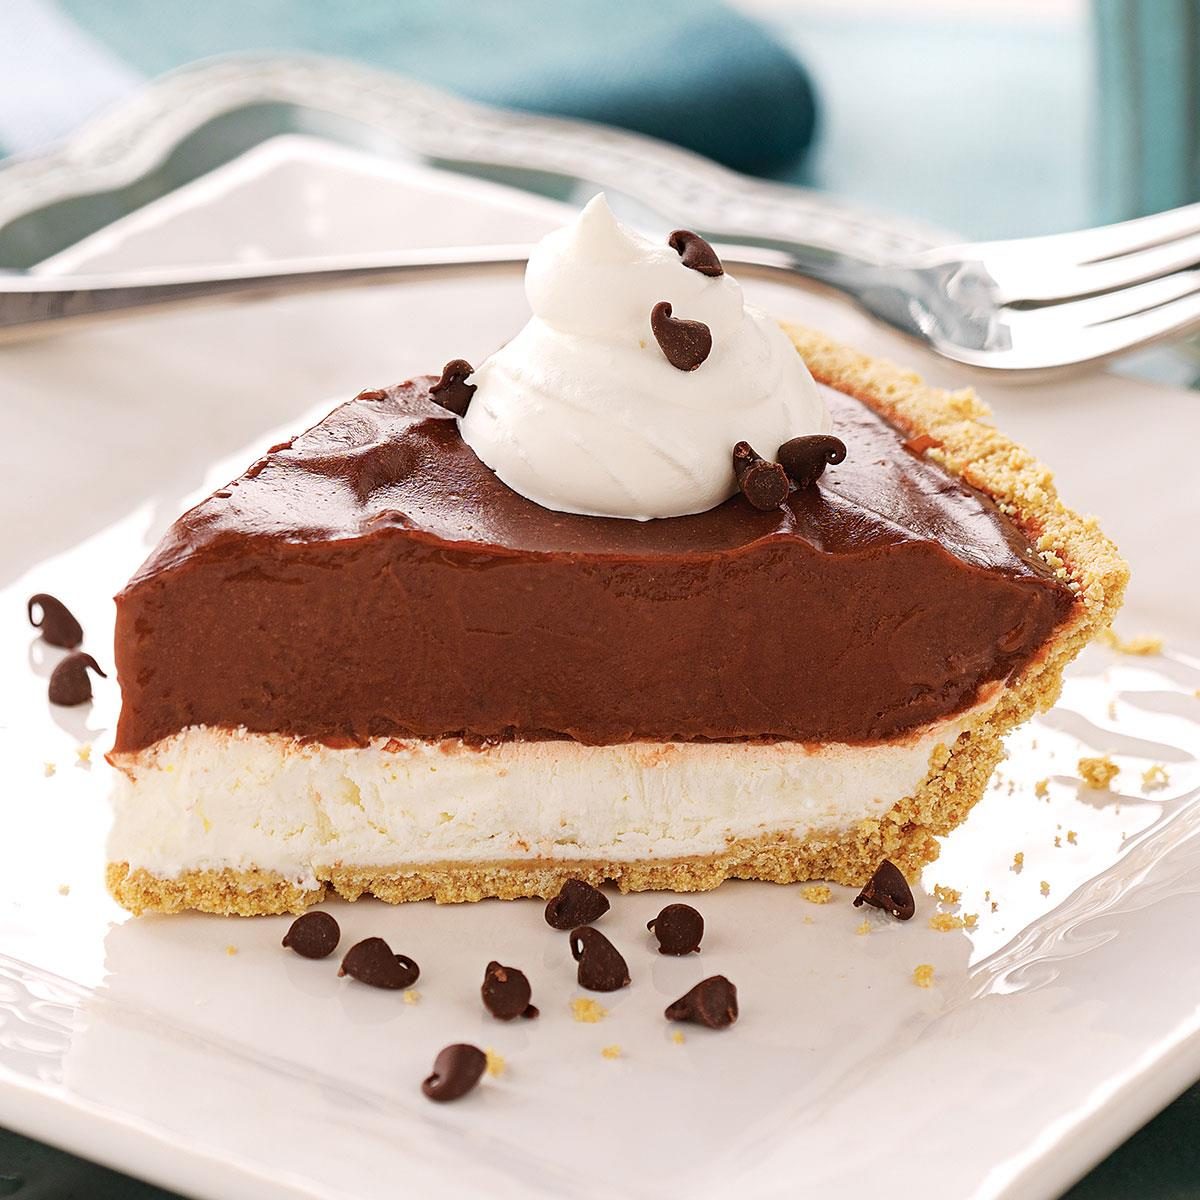 https://www.tasteofhome.com/wp-content/uploads/2018/01/Chocolate-Cream-Cheese-Pie_exps4201_RDS1872338D01_04_4bc_RMS.jpg?fit=1024,1024